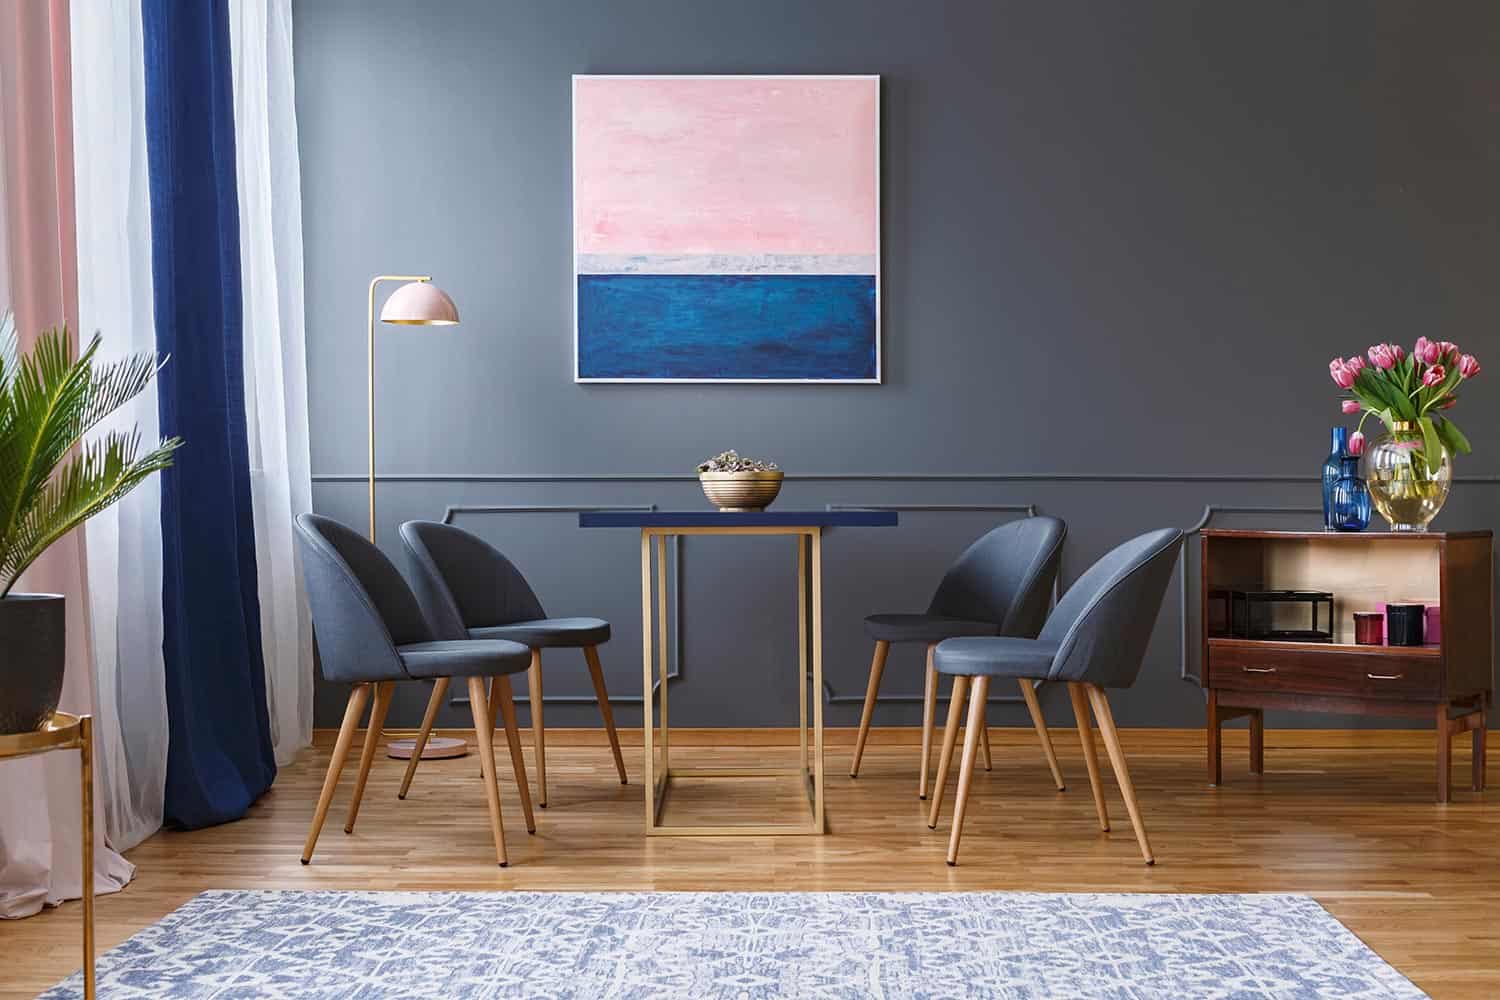 Four chairs standing around a table in a spacious dining room